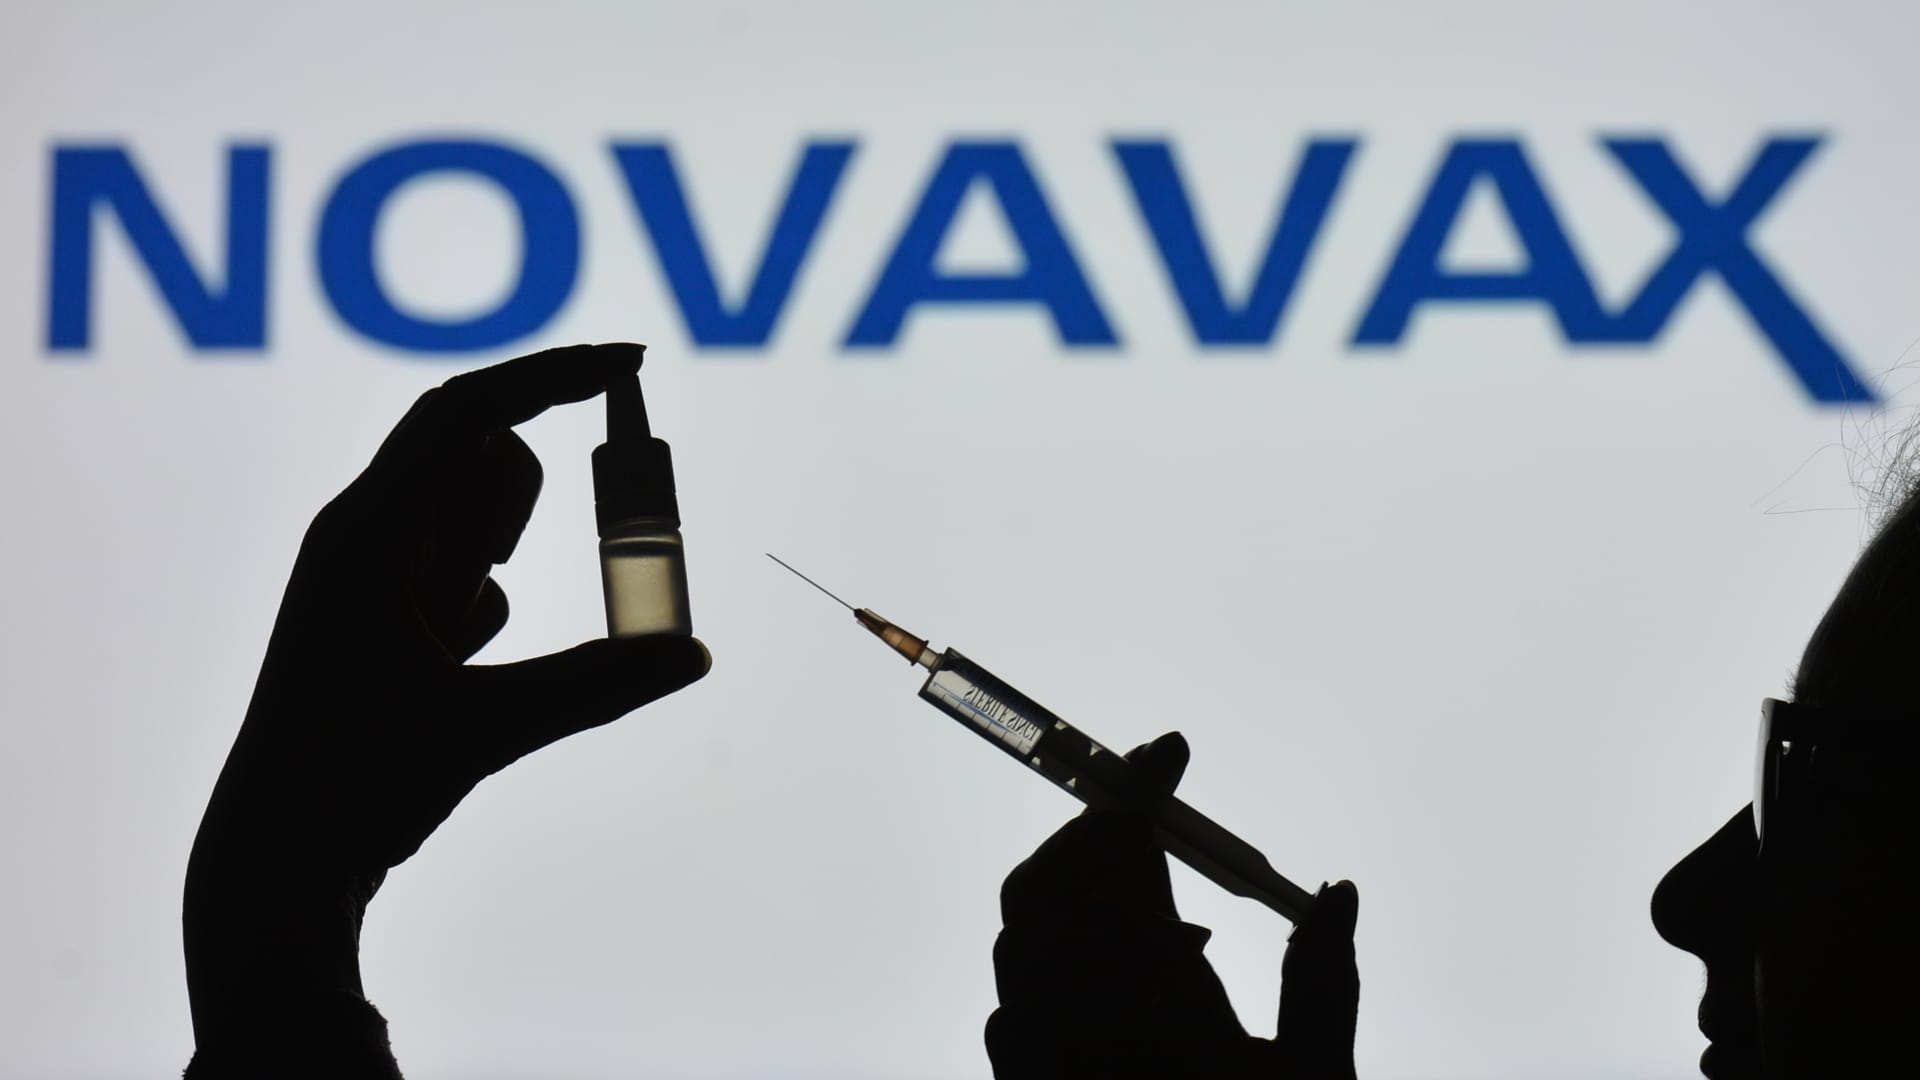 The CDC panel recommends the Novavax vaccine for adults